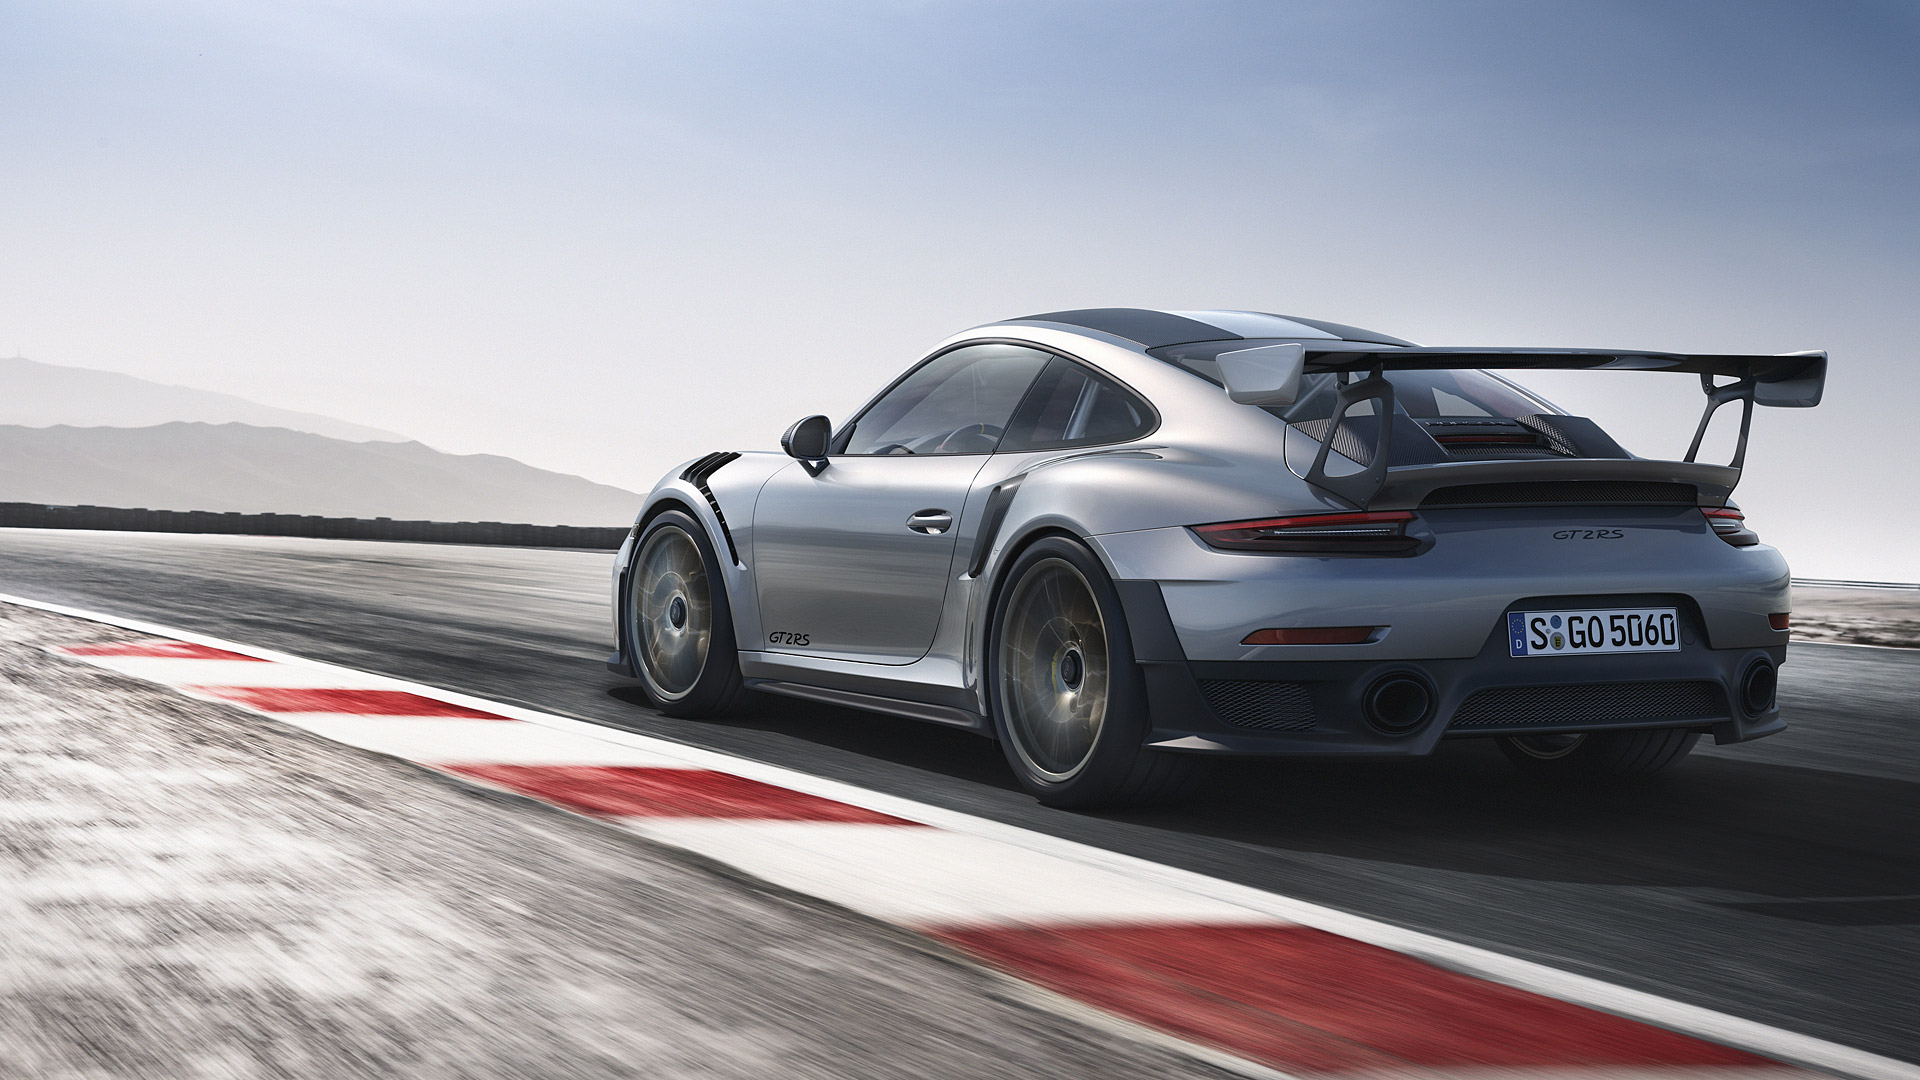 Porsche 911 GT2 Wallpapers and Background Images   stmednet